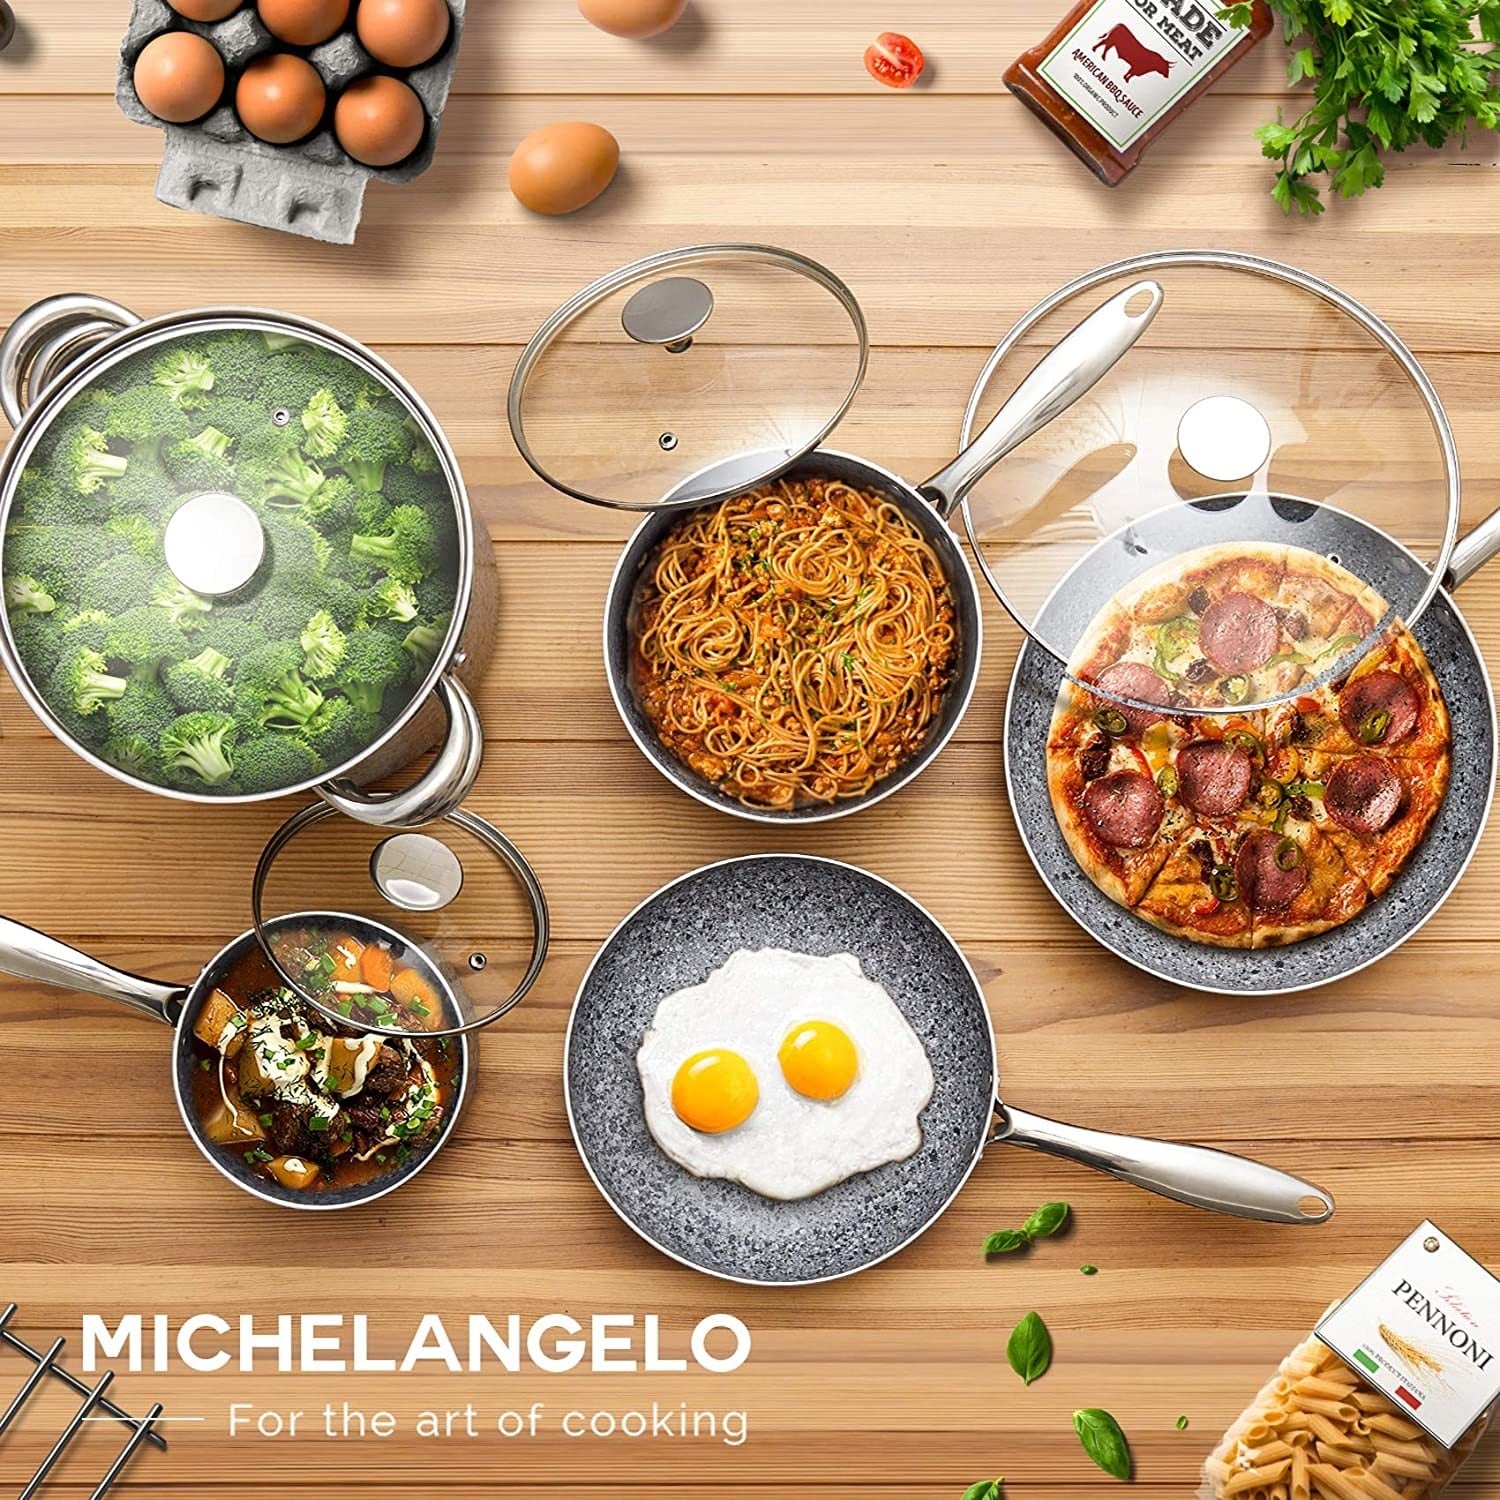  MICHELANGELO Pots and Pans Set 8 Piece, Cookware with Granite  Coatings for Super Nonstick Result, Essential Stone Utensil: Home & Kitchen